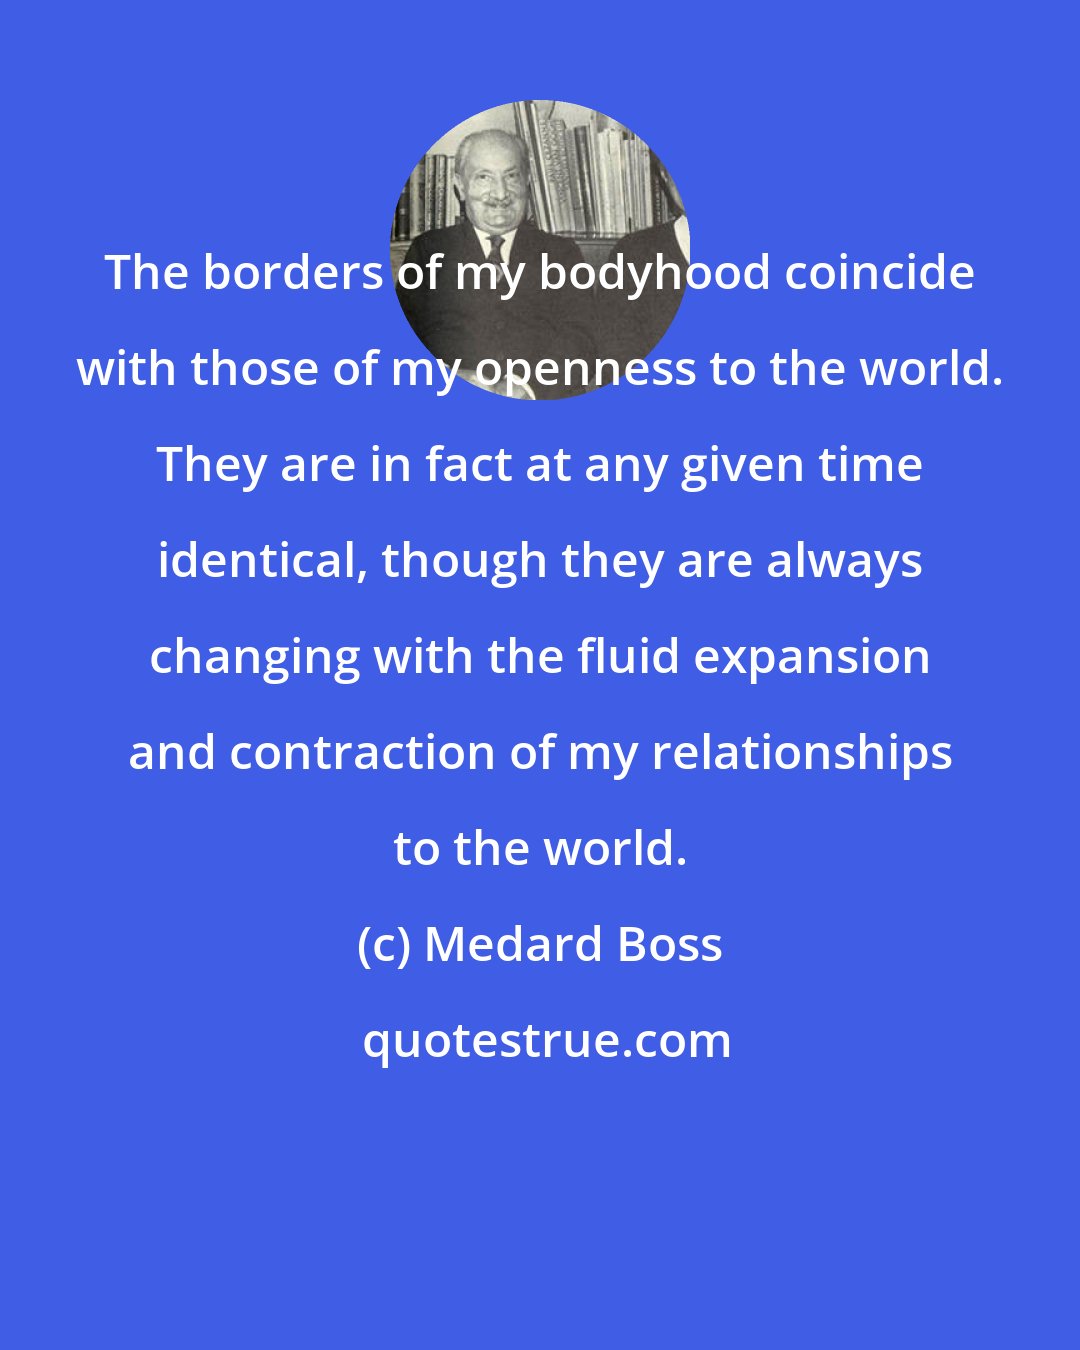 Medard Boss: The borders of my bodyhood coincide with those of my openness to the world. They are in fact at any given time identical, though they are always changing with the fluid expansion and contraction of my relationships to the world.